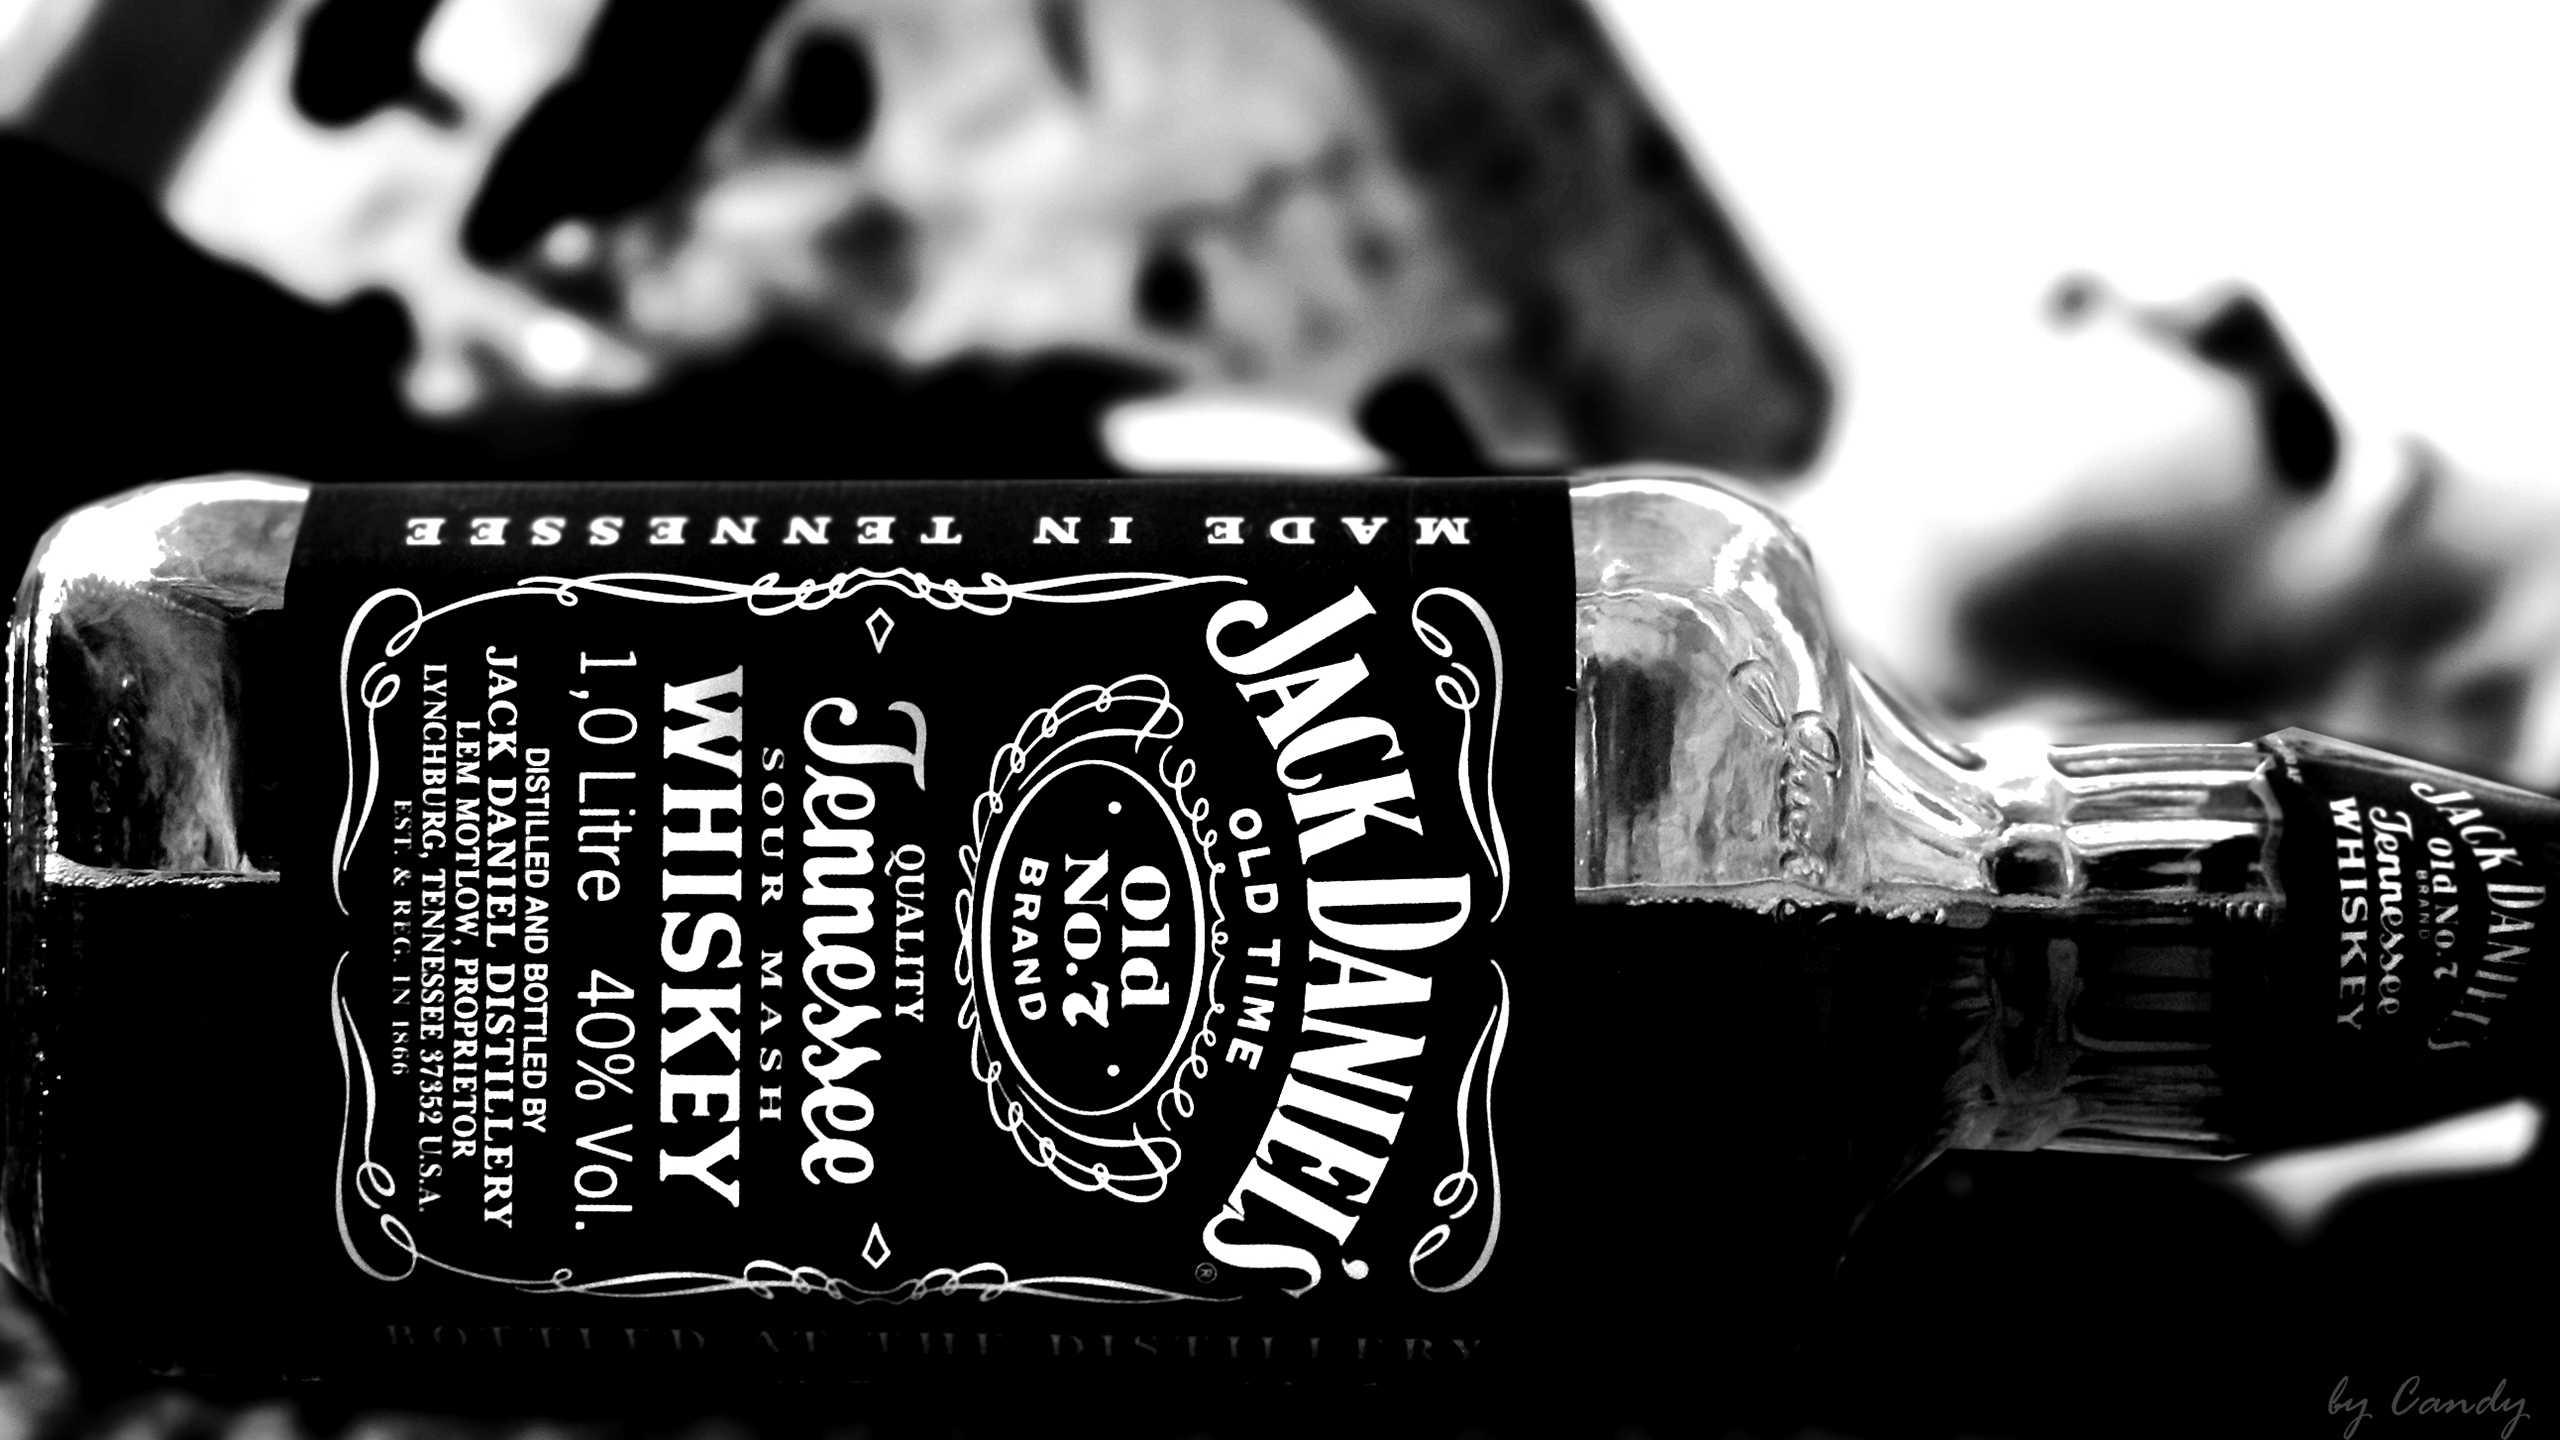 Jack Daniels High Quality Wallpapers Images, Photos, Reviews